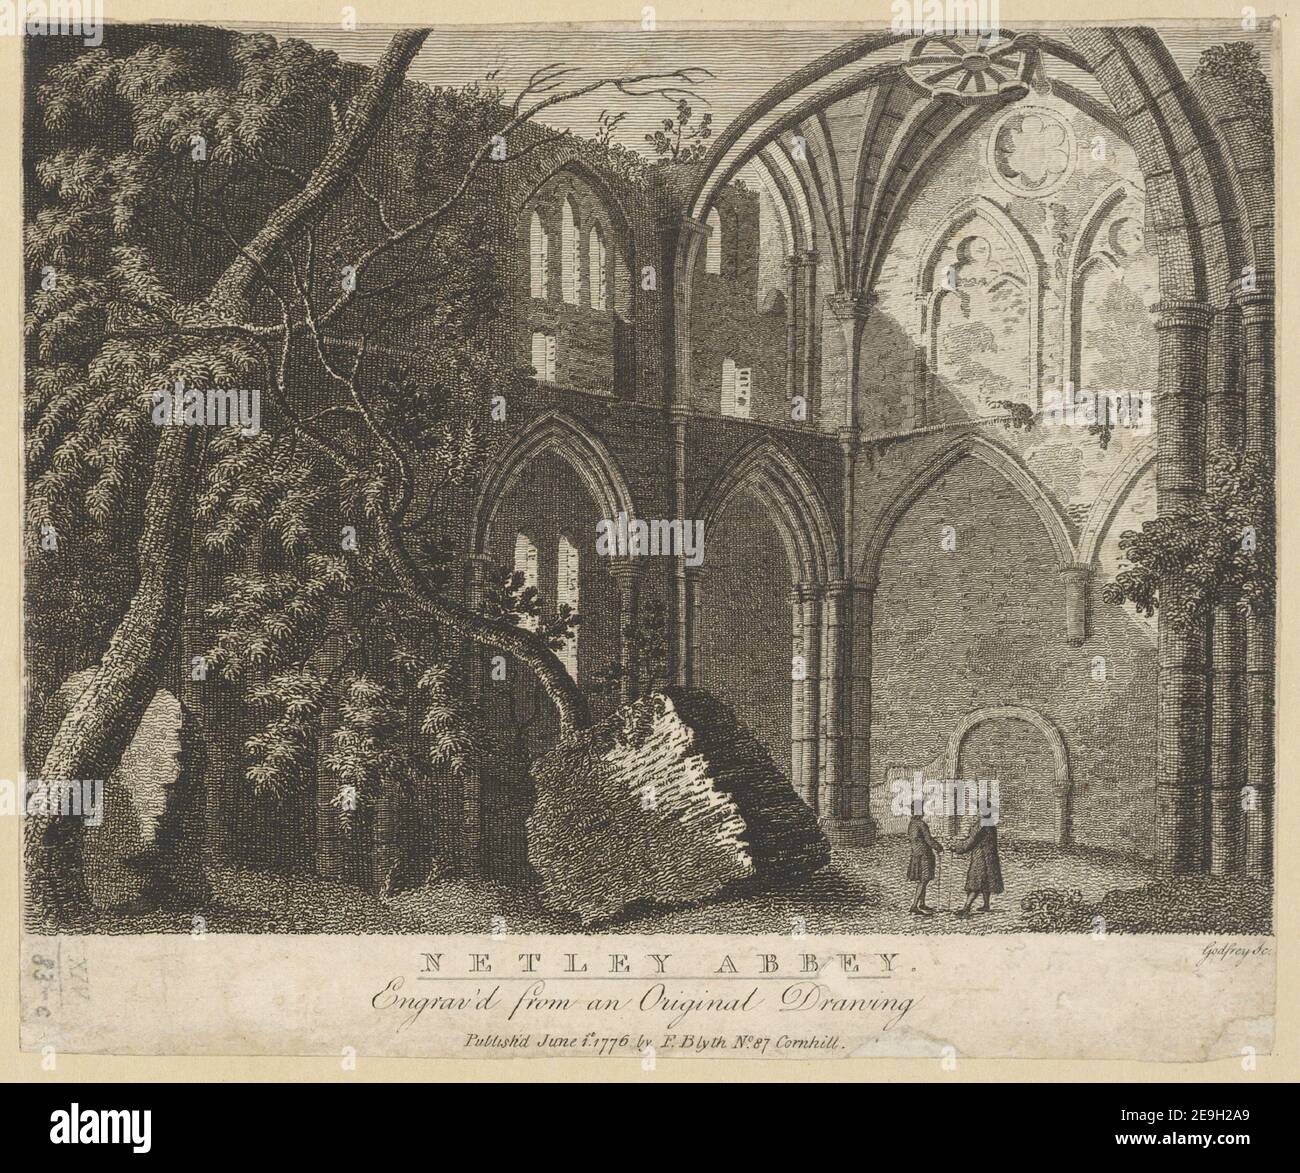 Netley Abbey.  Author  Godfrey, Richard Bernard 14.83.c. Place of publication: [London] Publisher: Publish'd June 1.st 1776, by F. Blyth No. 87 Cornhill., Date of publication: [1776]  Item type: 1 print Medium: etching Dimensions: sheet 18.0 x 21.7 cm  Former owner: George III, King of Great Britain, 1738-1820 Stock Photo